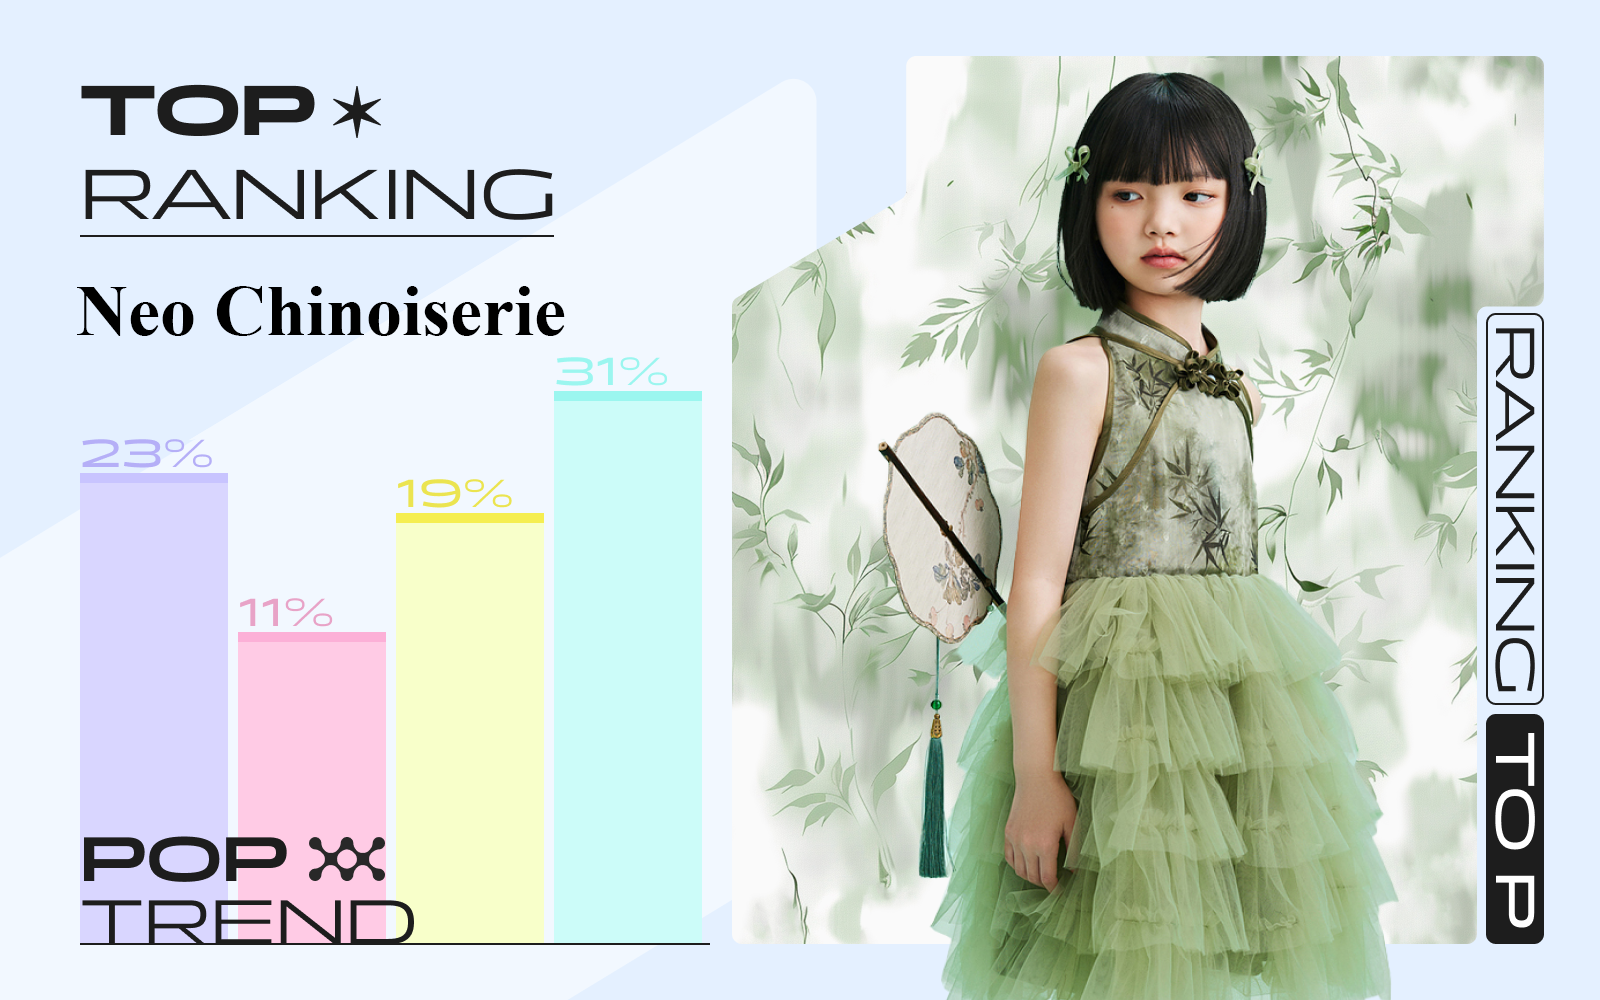 Neo Chinoiserie -- The TOP Ranking of Kidswear Pattern